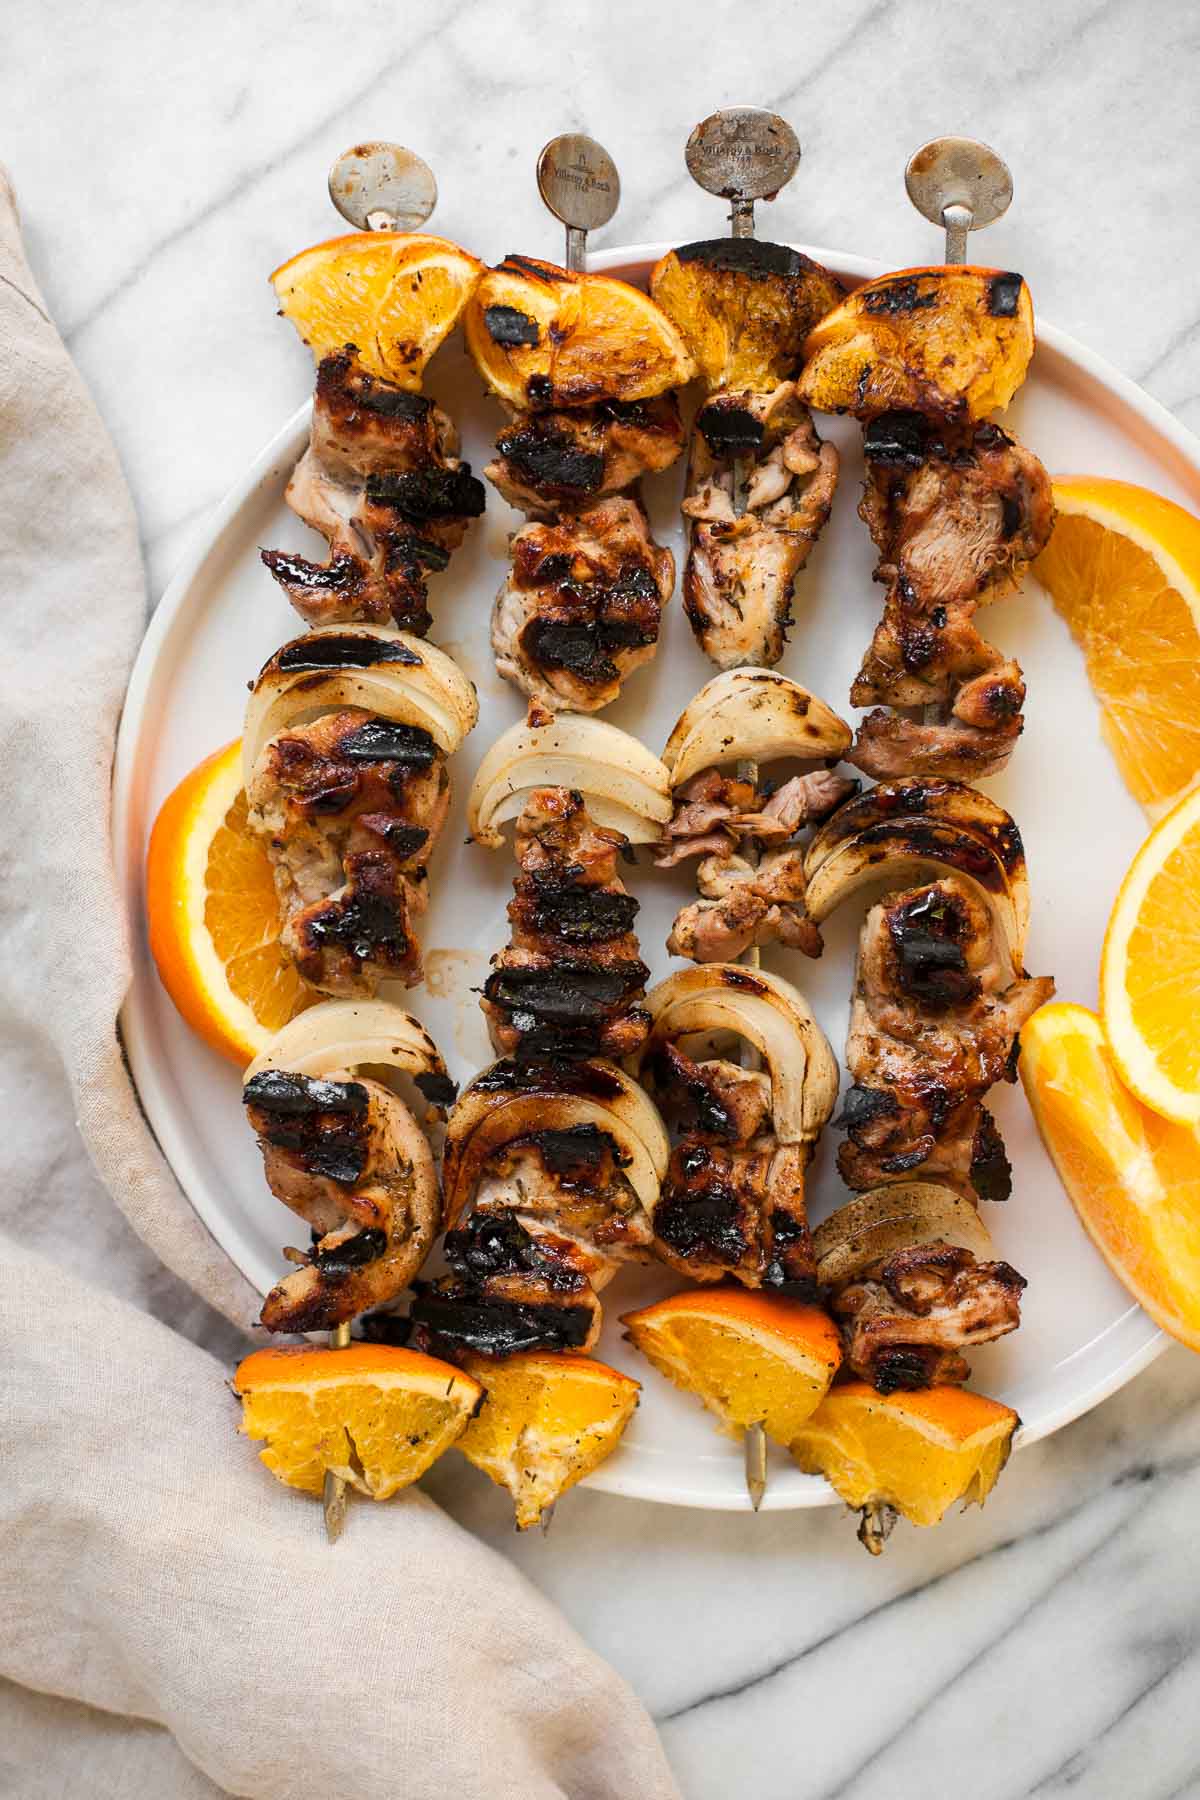 Orange Chicken Skewers from Made Whole